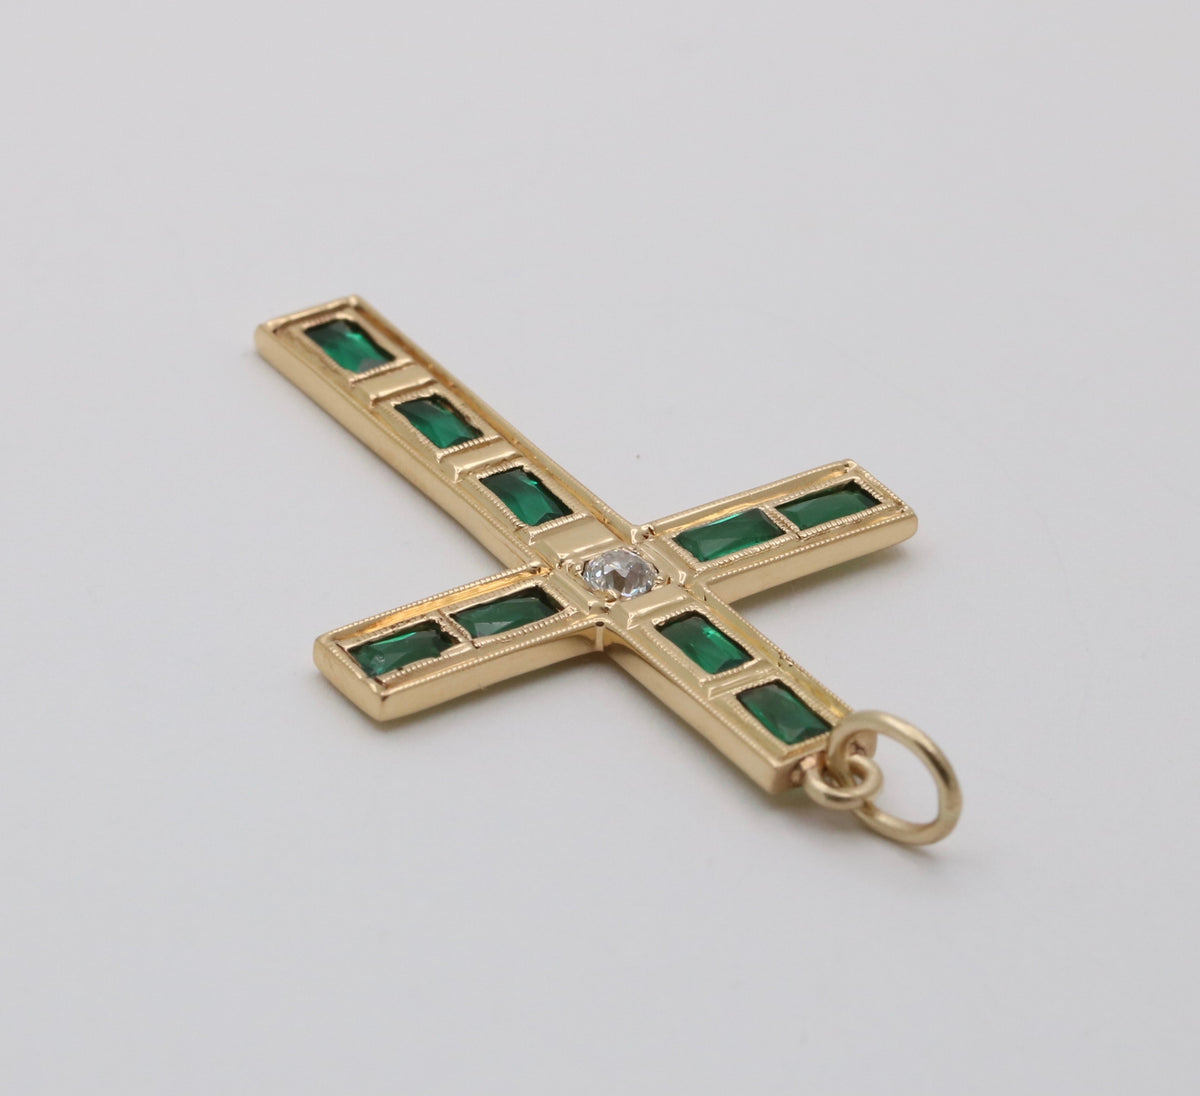 Vintage 18K Gold, Diamond and Synthetic Emerald Cross Pendant